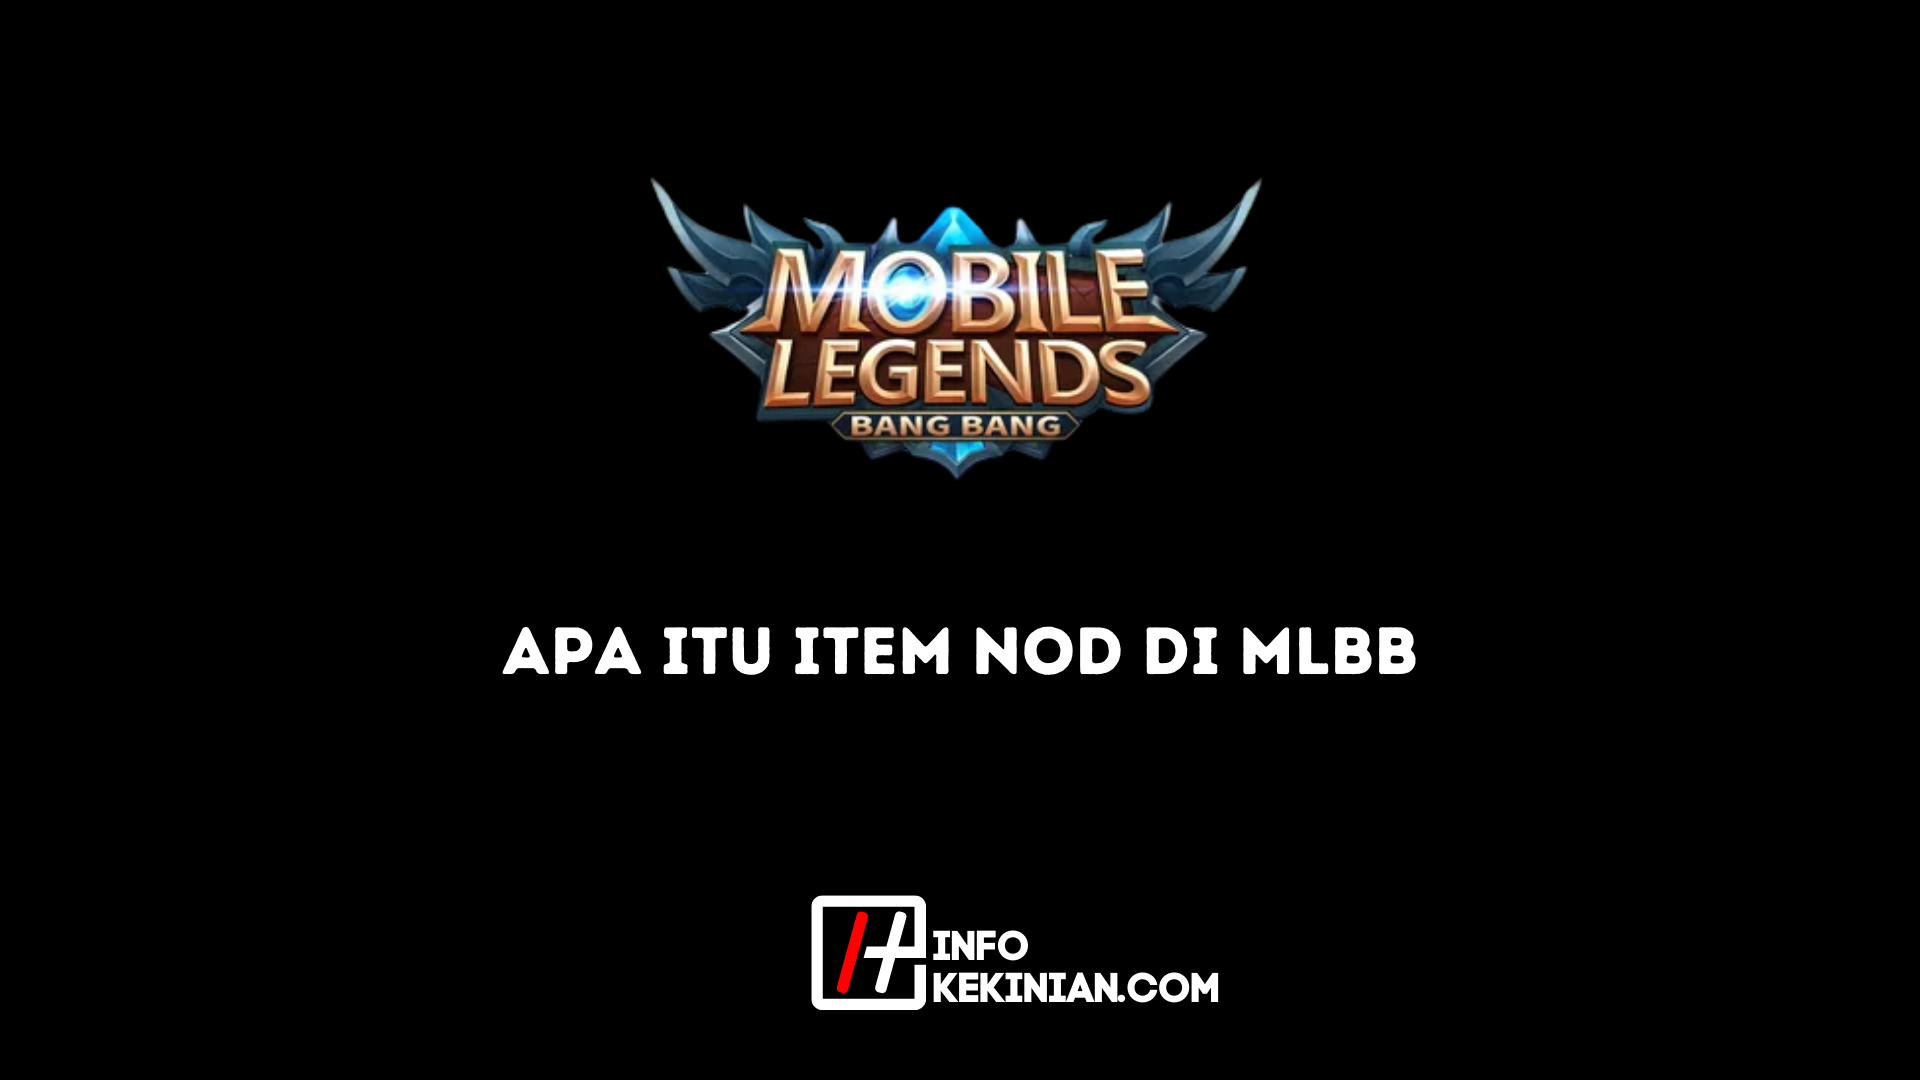 What are NOD Items in MLBB